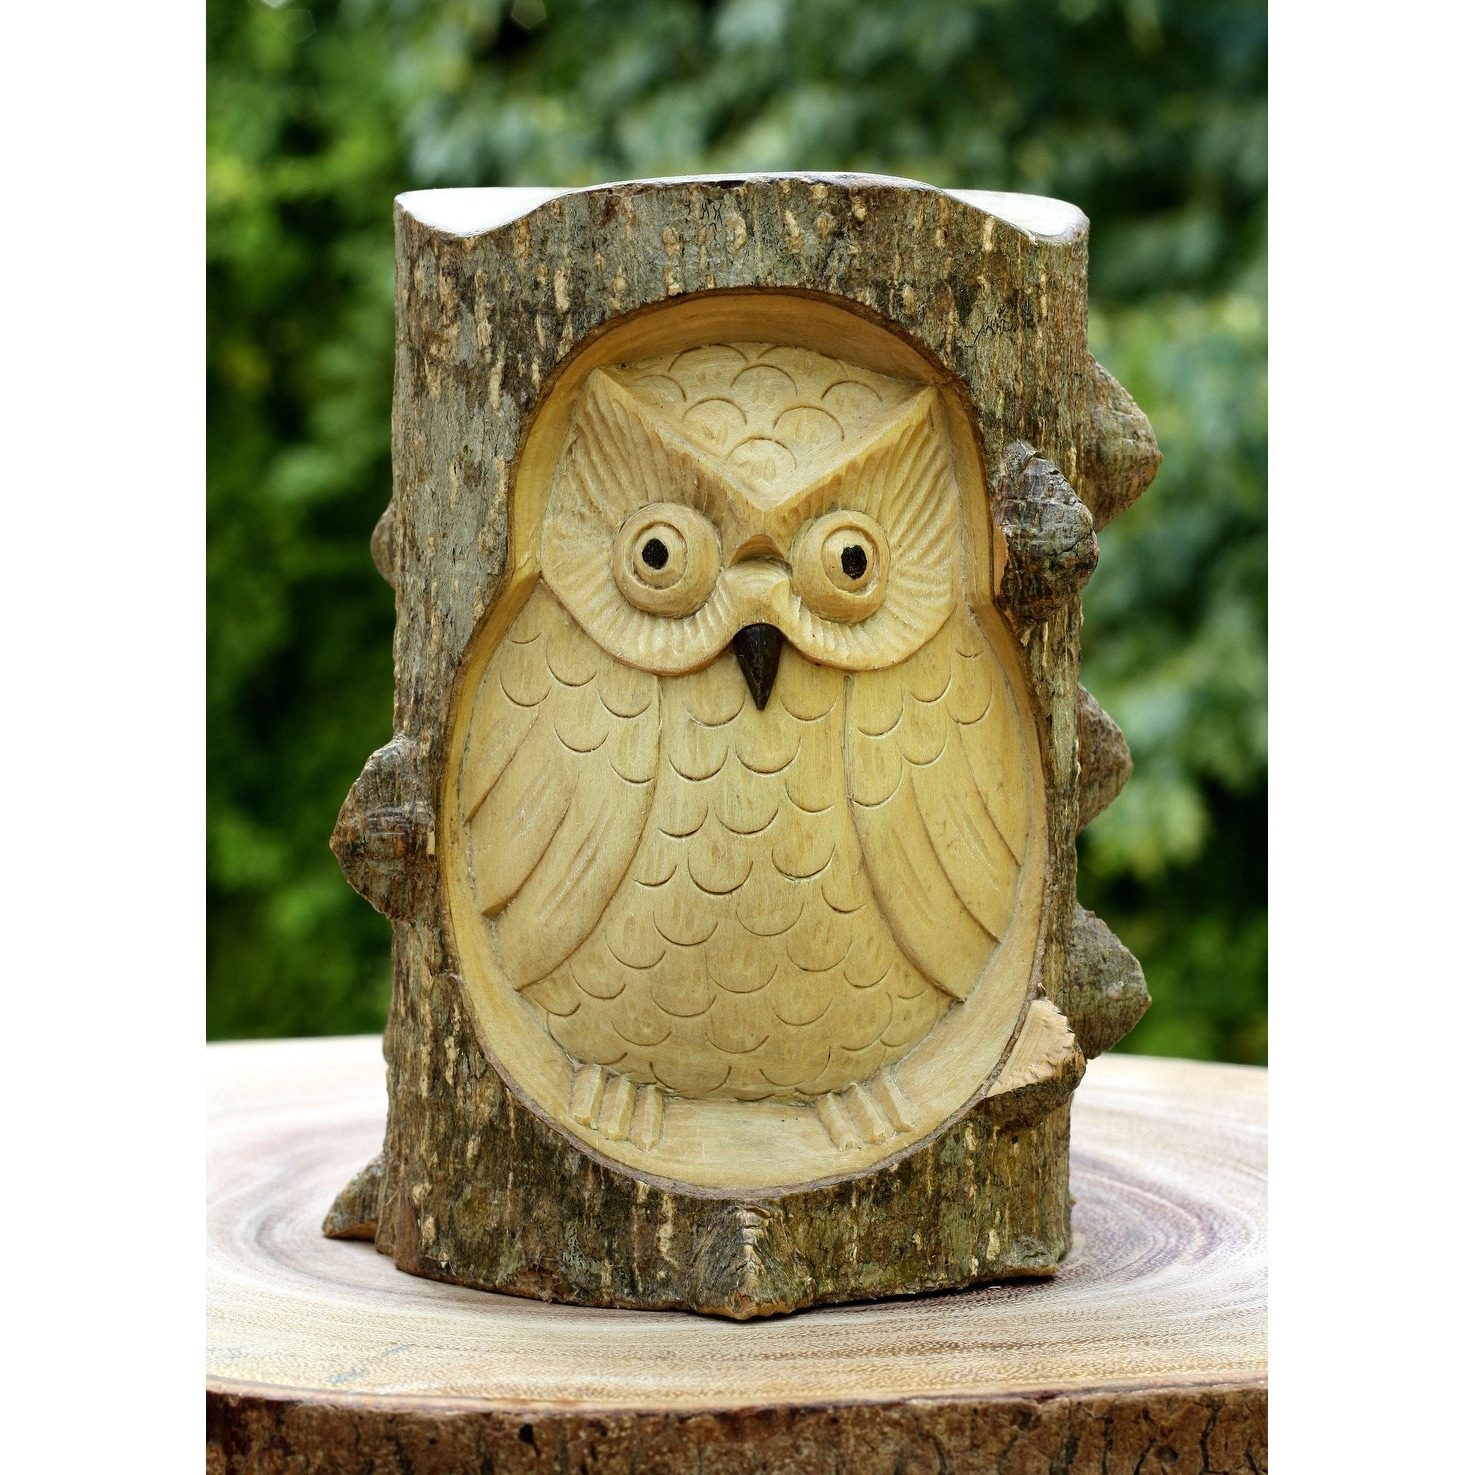 Unique Gift Hand Carved Wooden Owl Statue Figurine Sculpture Wood Home Decor Art 